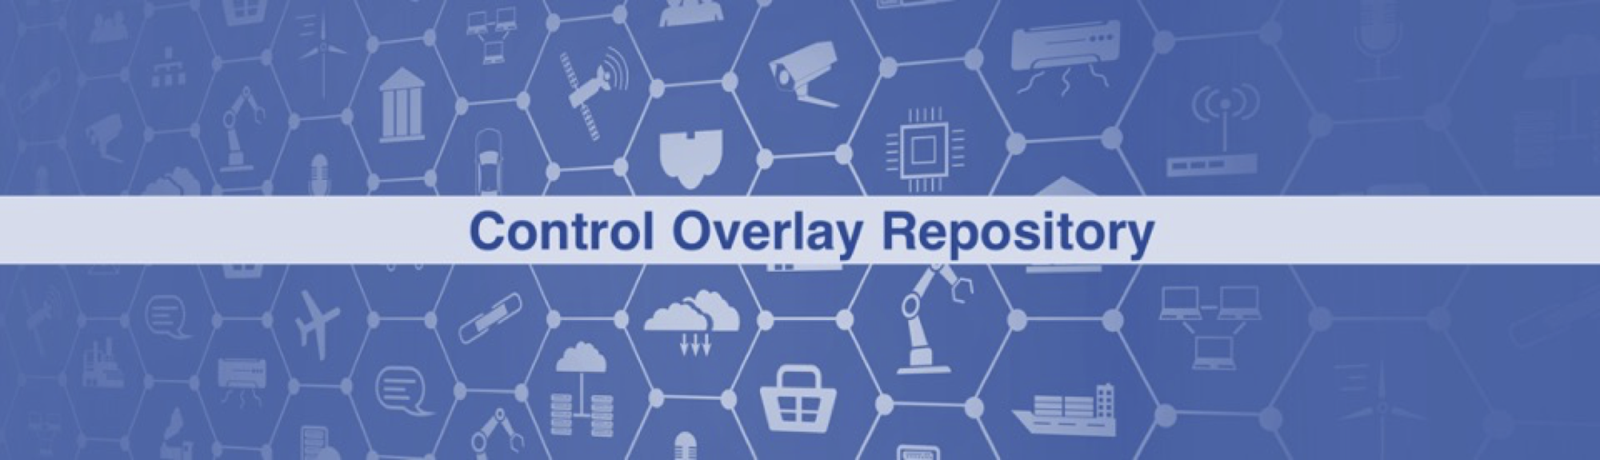 Control Overlay Repository Banner